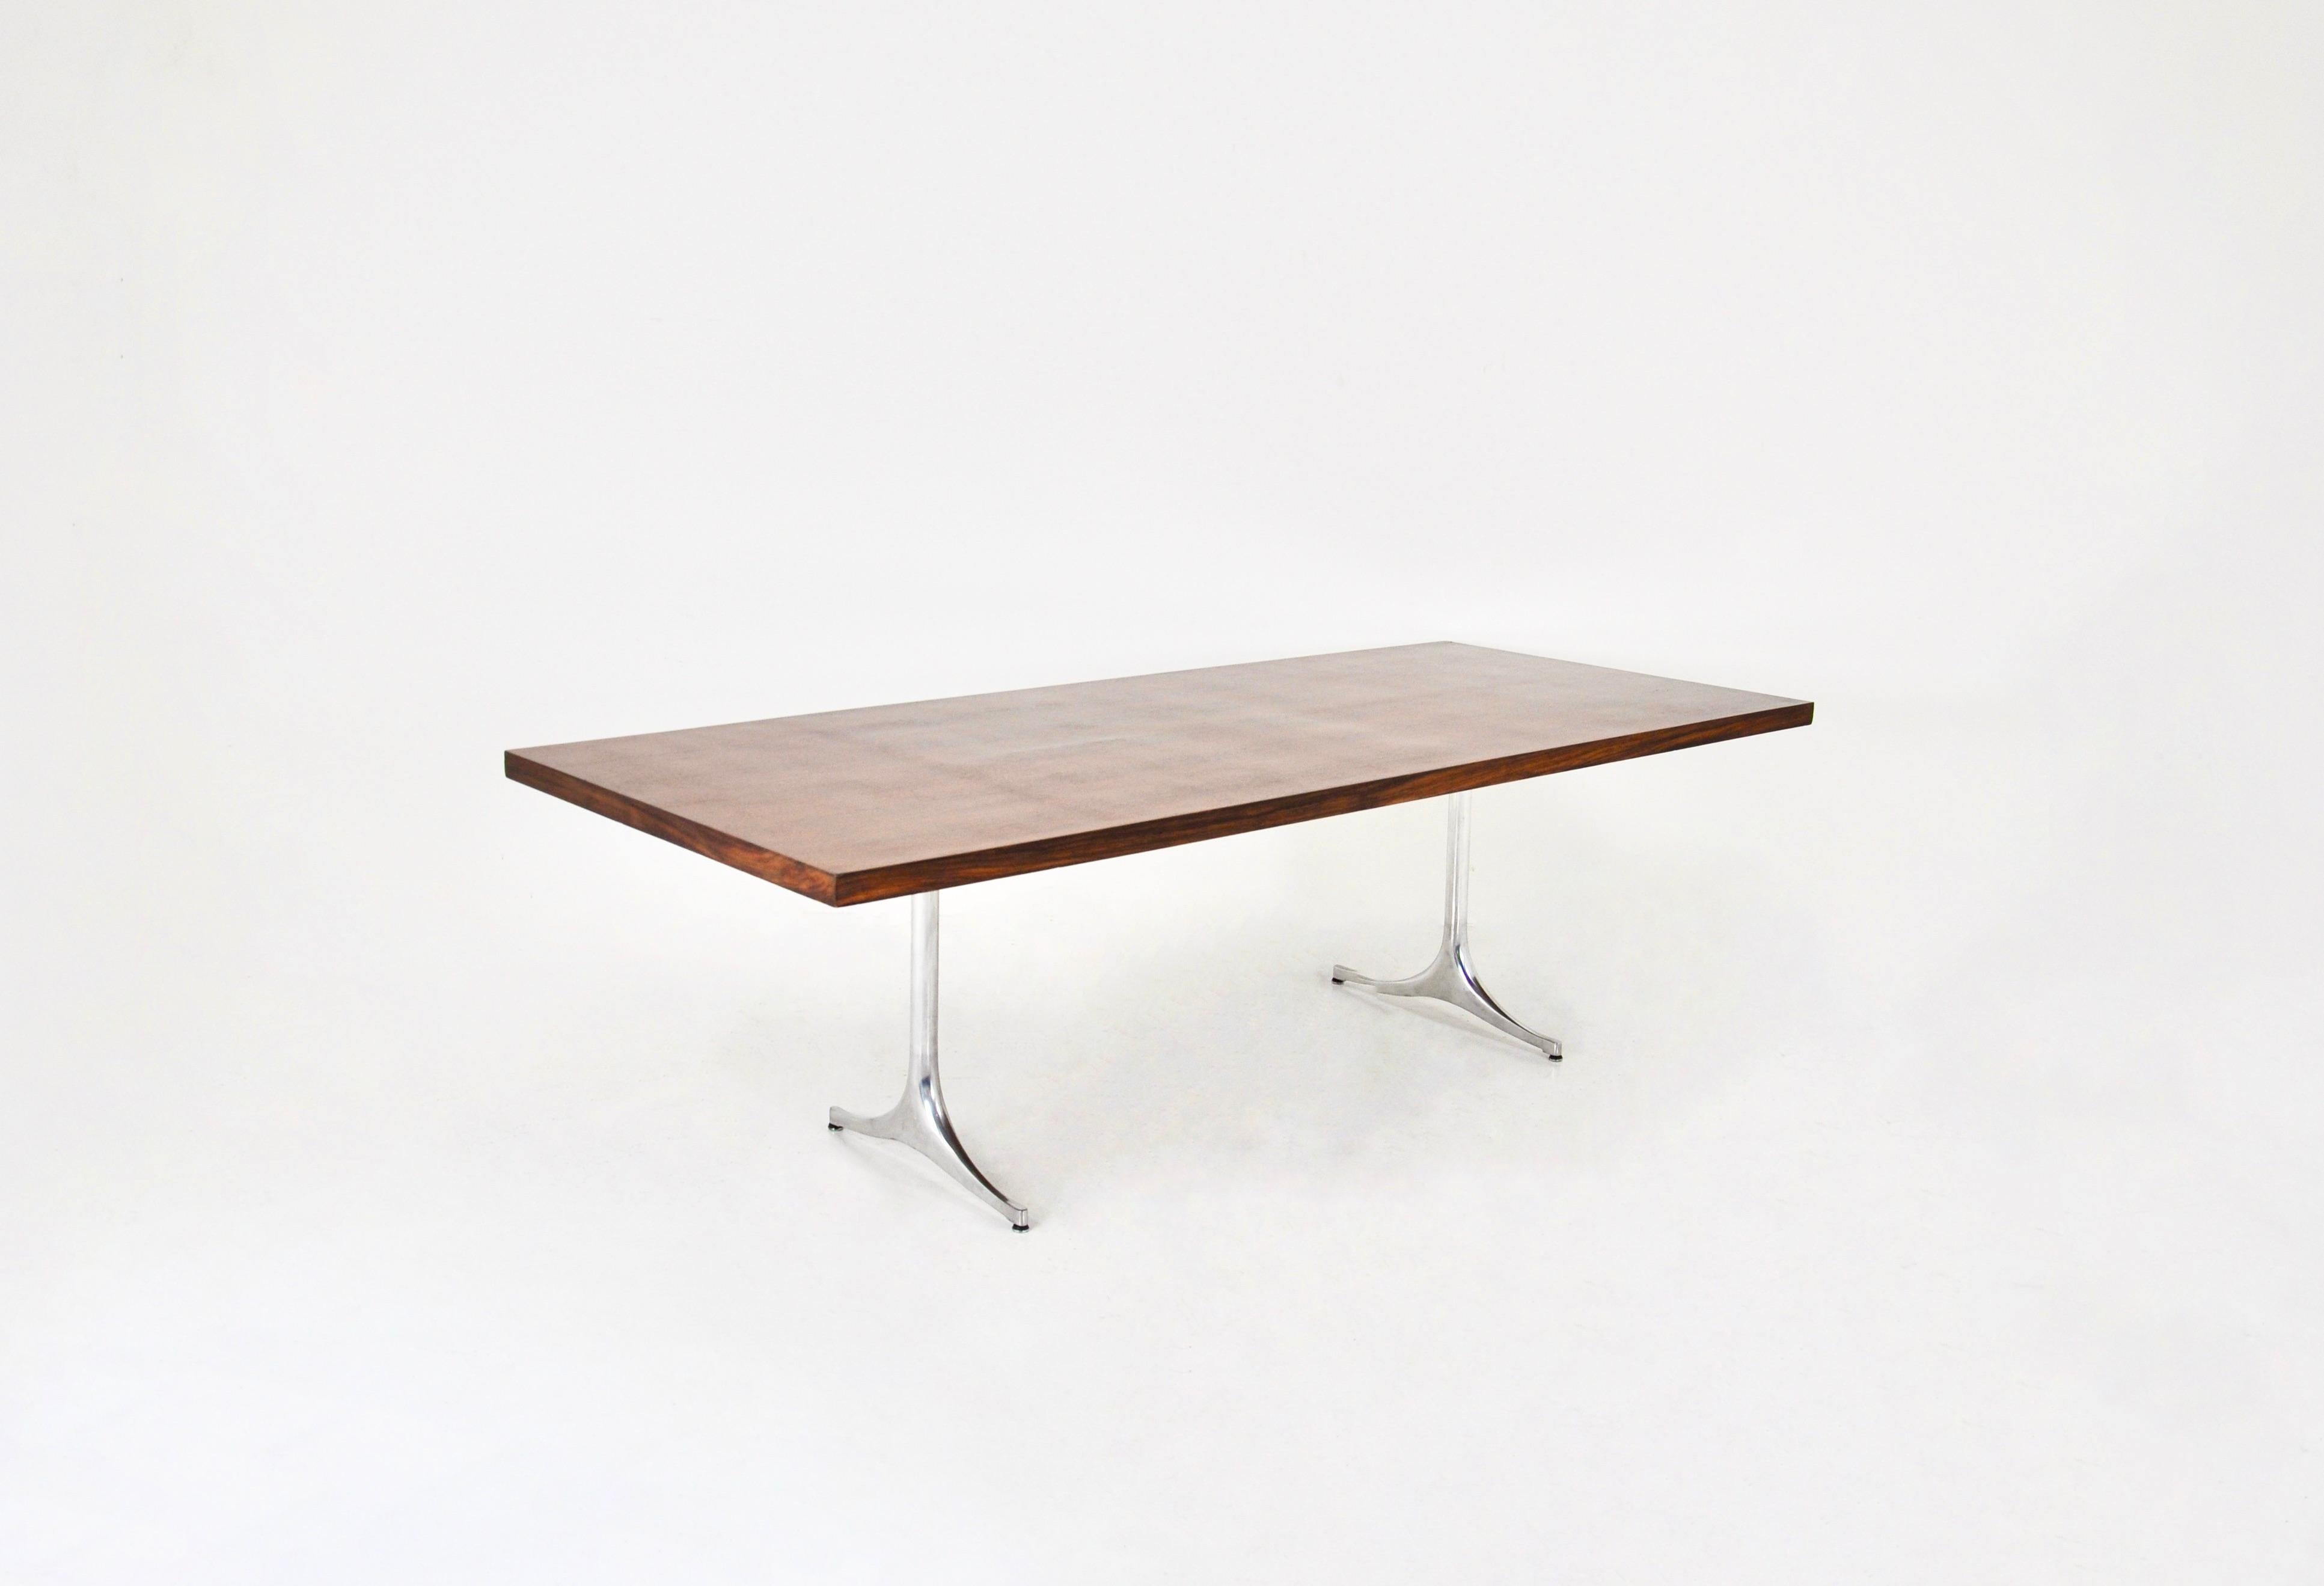 Wooden table with metal legs by George Nelson. Numbered on the leg. Wear due to time and age of the table.
